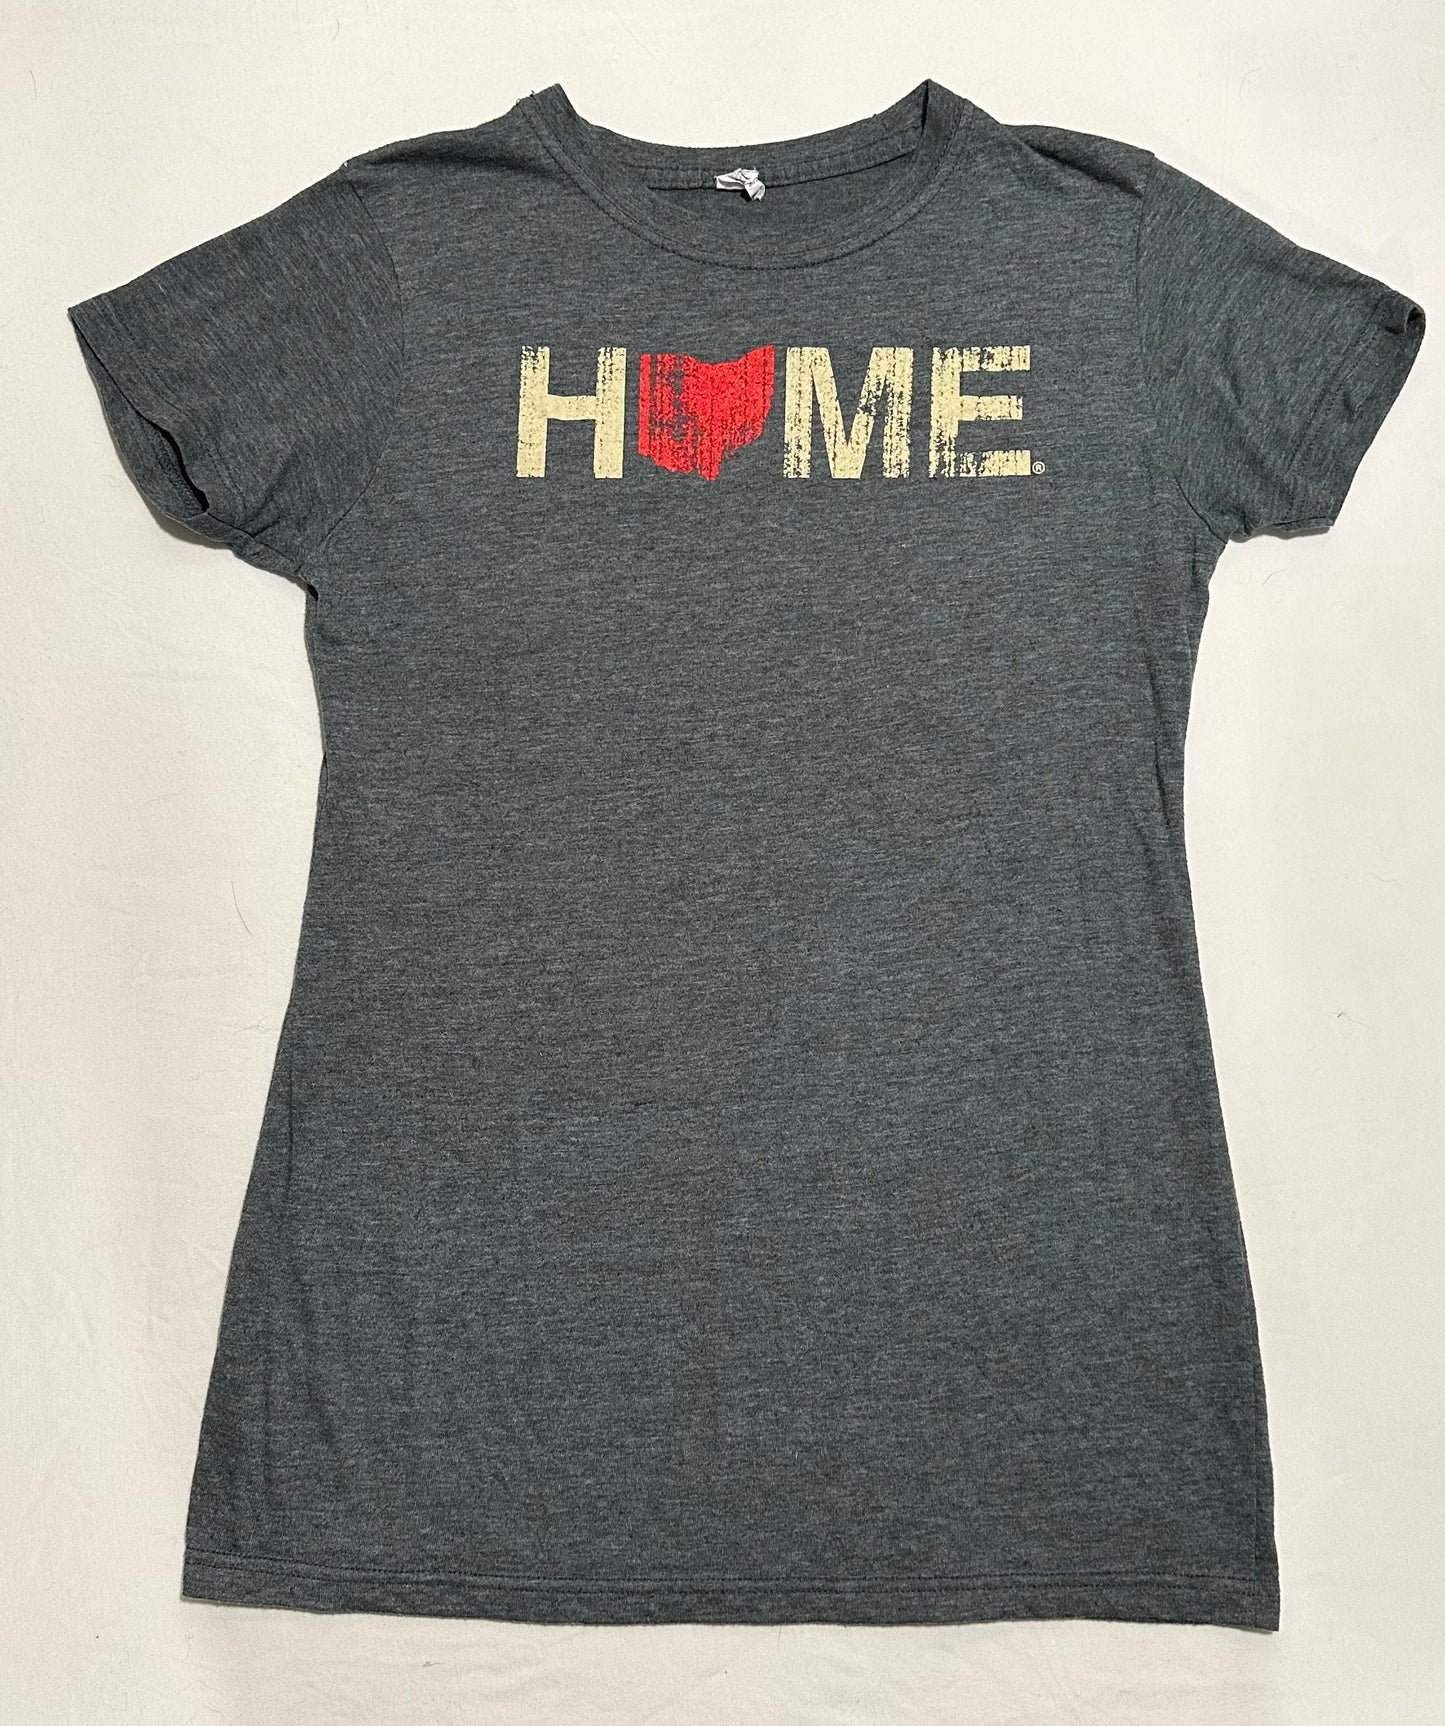 Ohio Home Shirt - Women’s Fitted M - VGUC